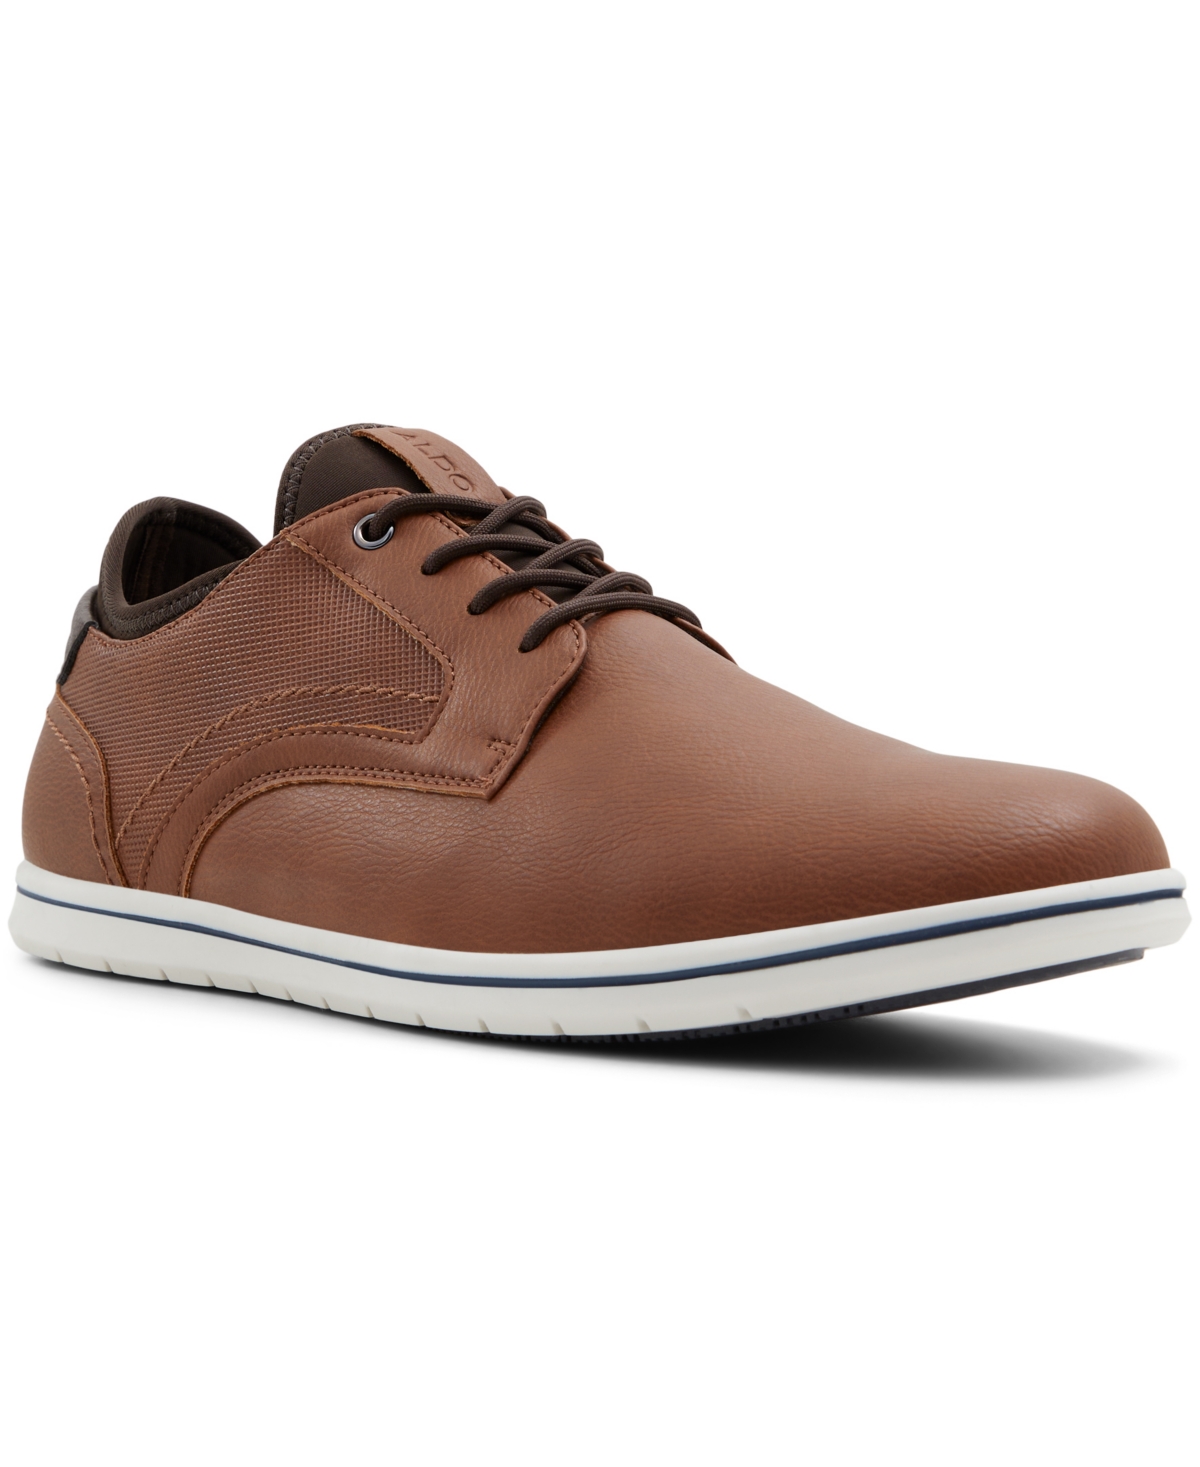 Men's Carnaby Casual Lace Up Sneaker - Cognac